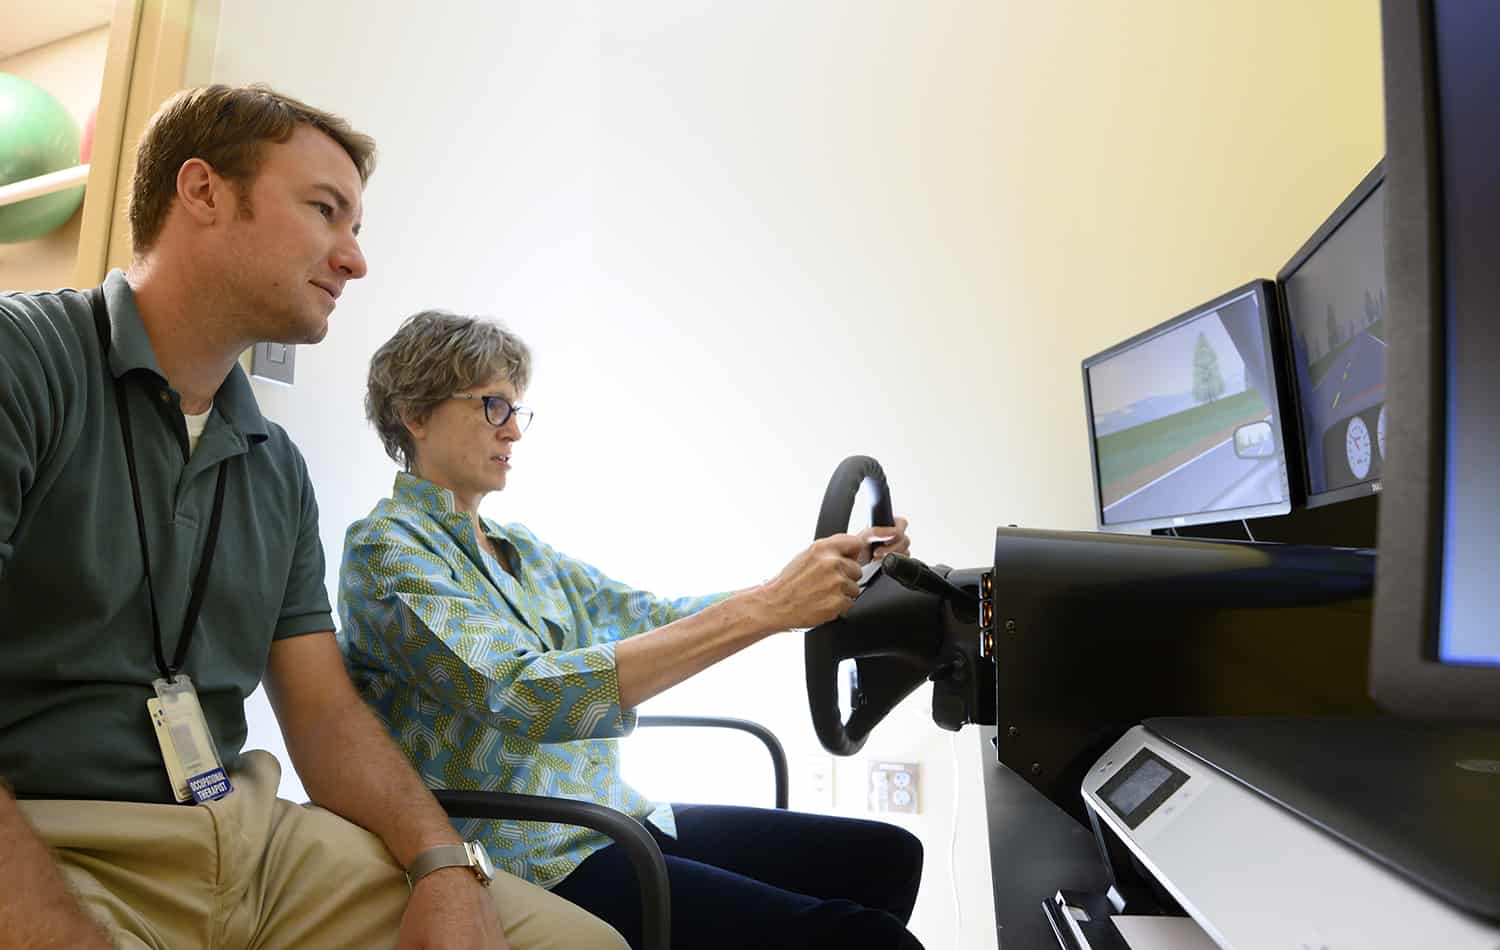 tbi therapist with patient and drive simulator